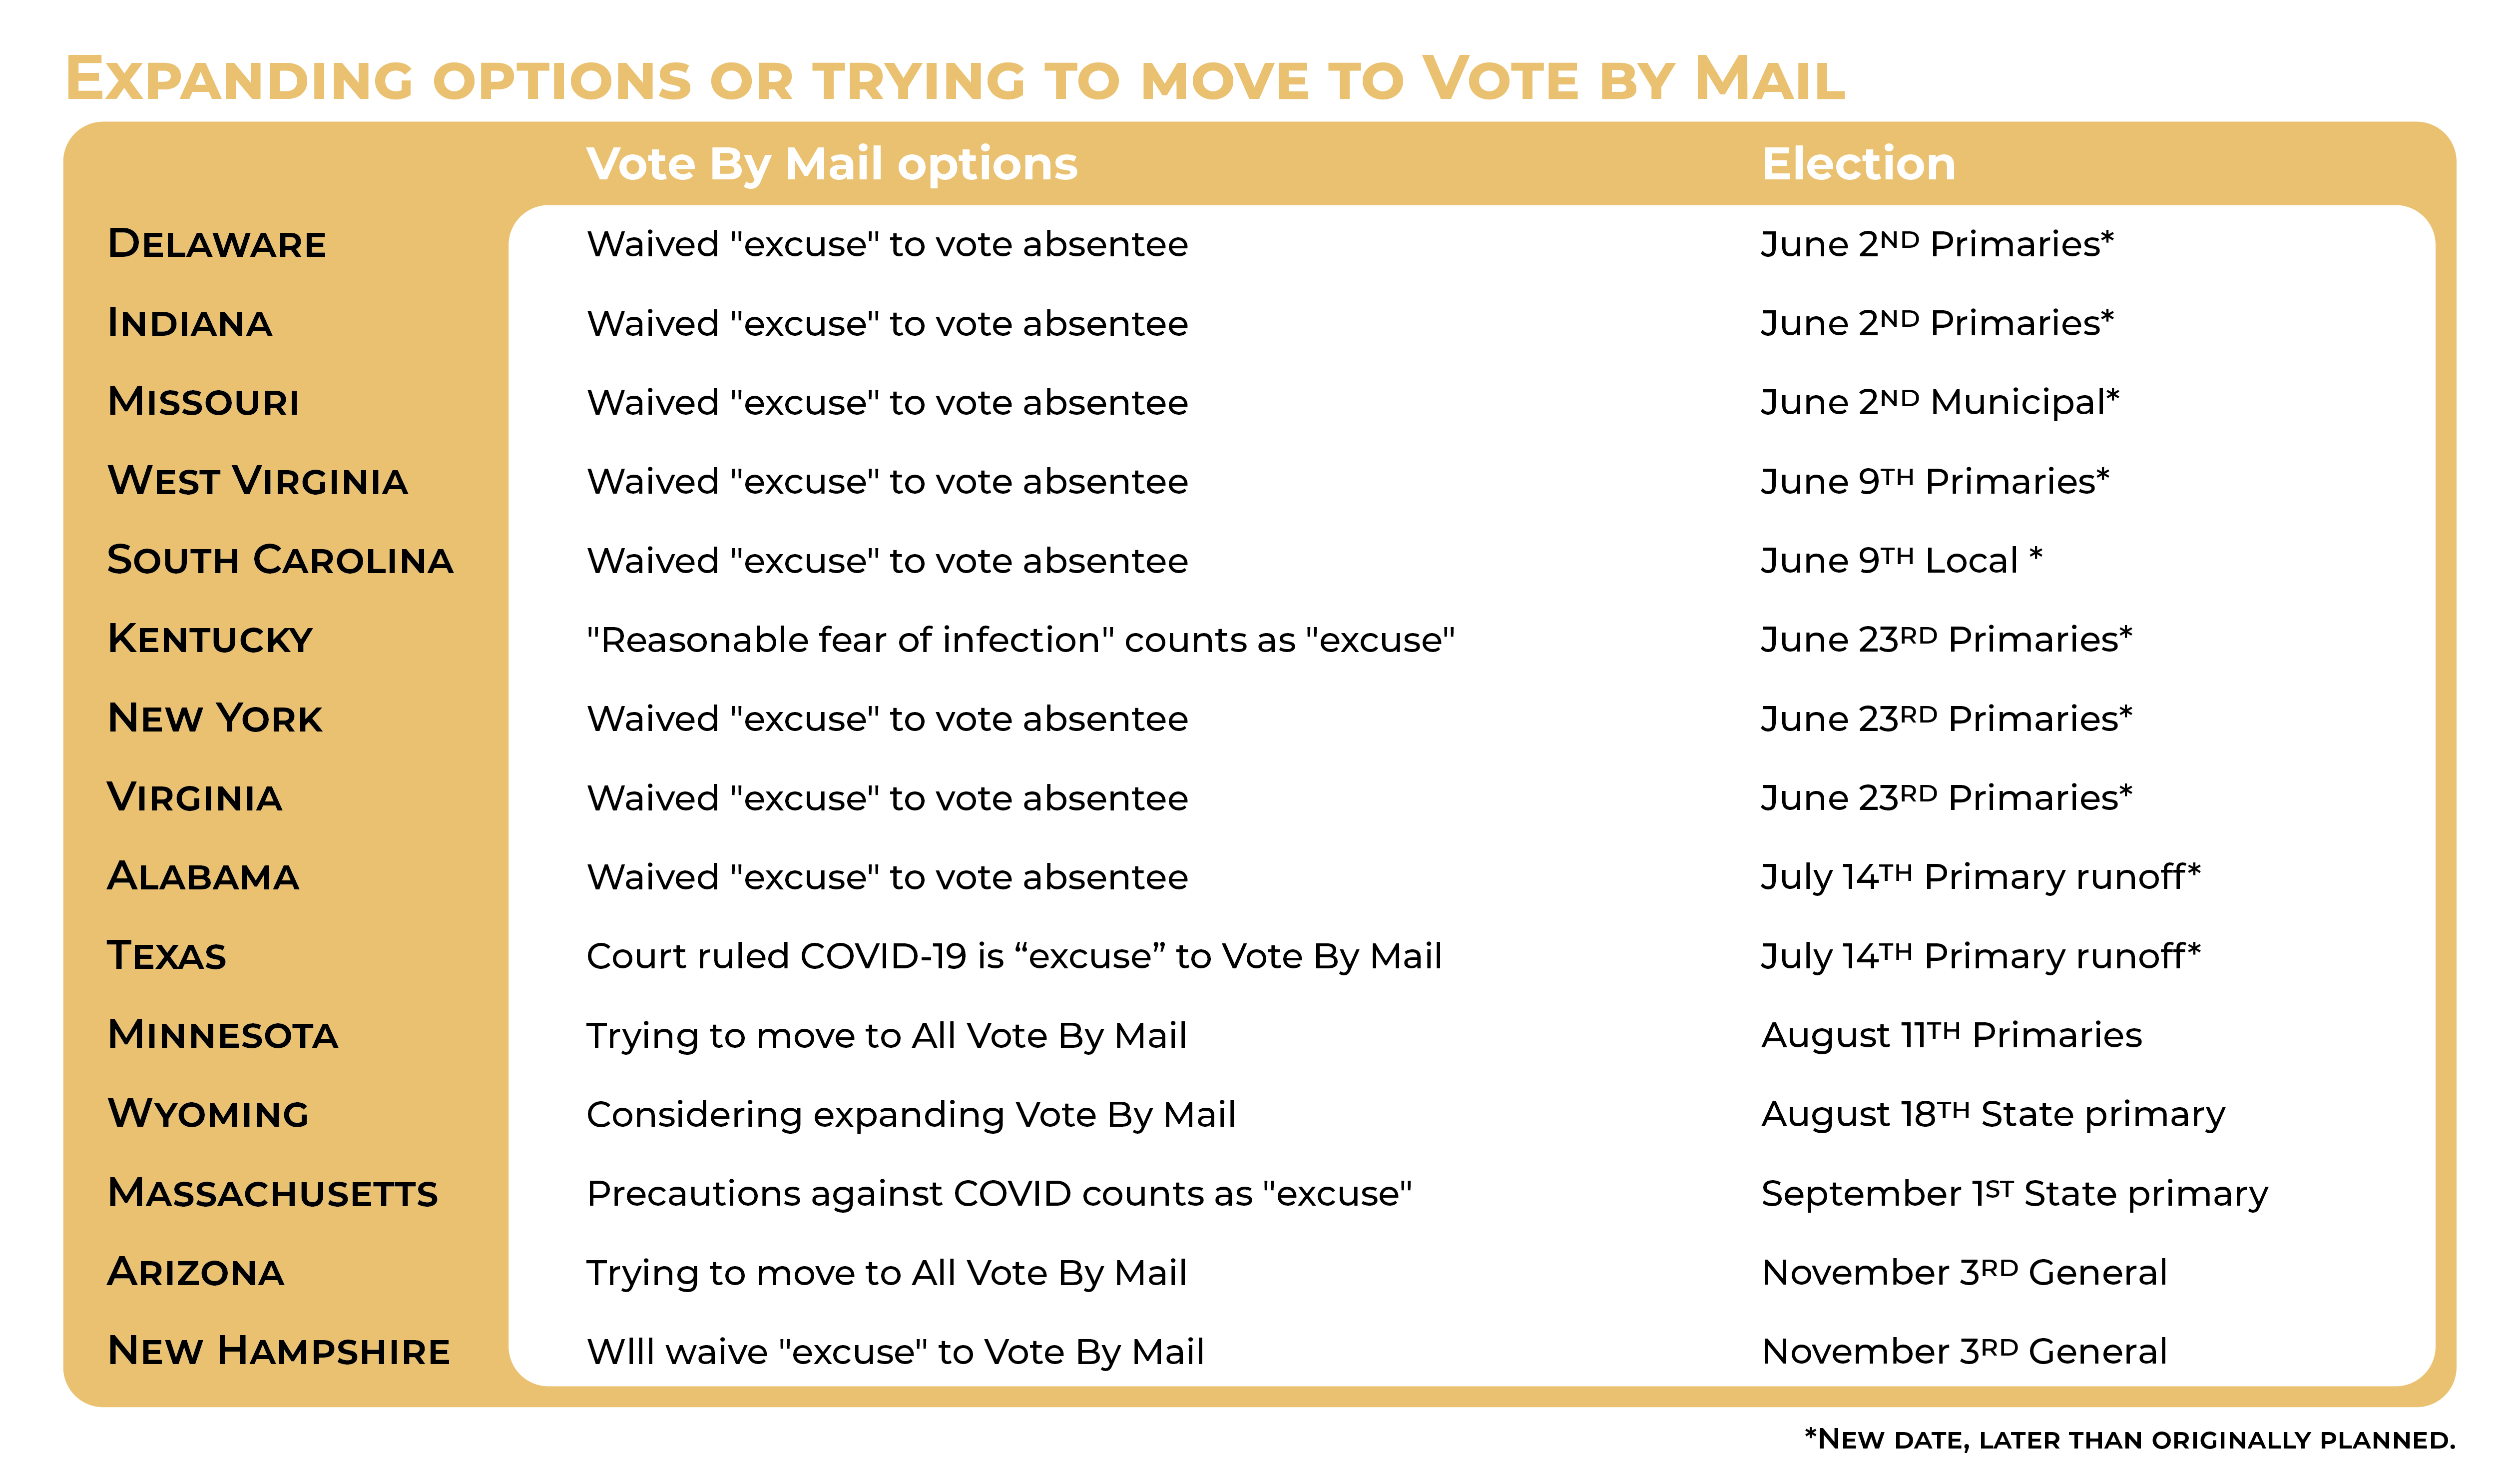 Coronavirus Election Tracker: States expanding vote at home options or trying to move to Vote By Mail.